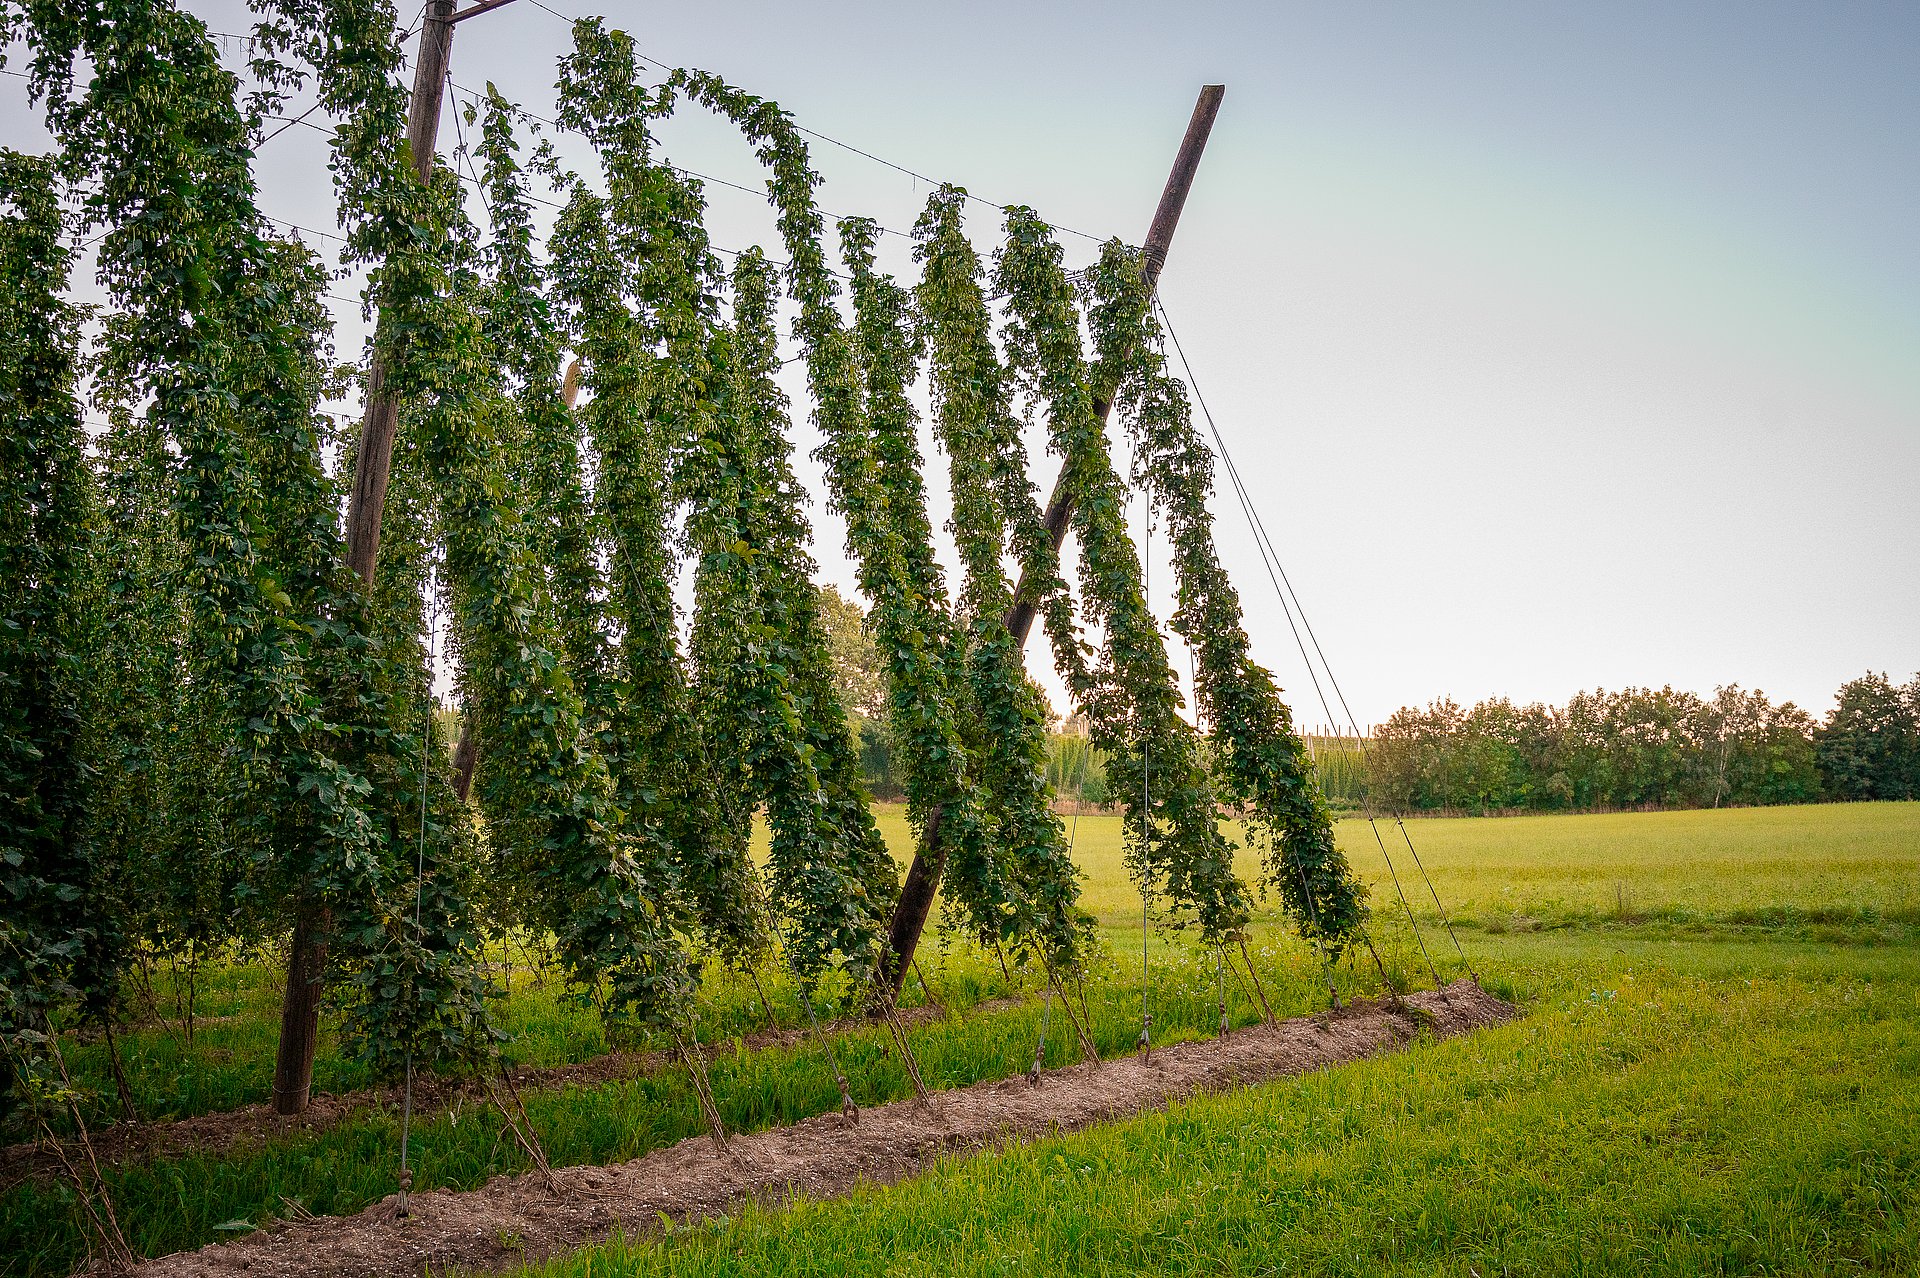 Hop vines in the Hallertau grow along a wire